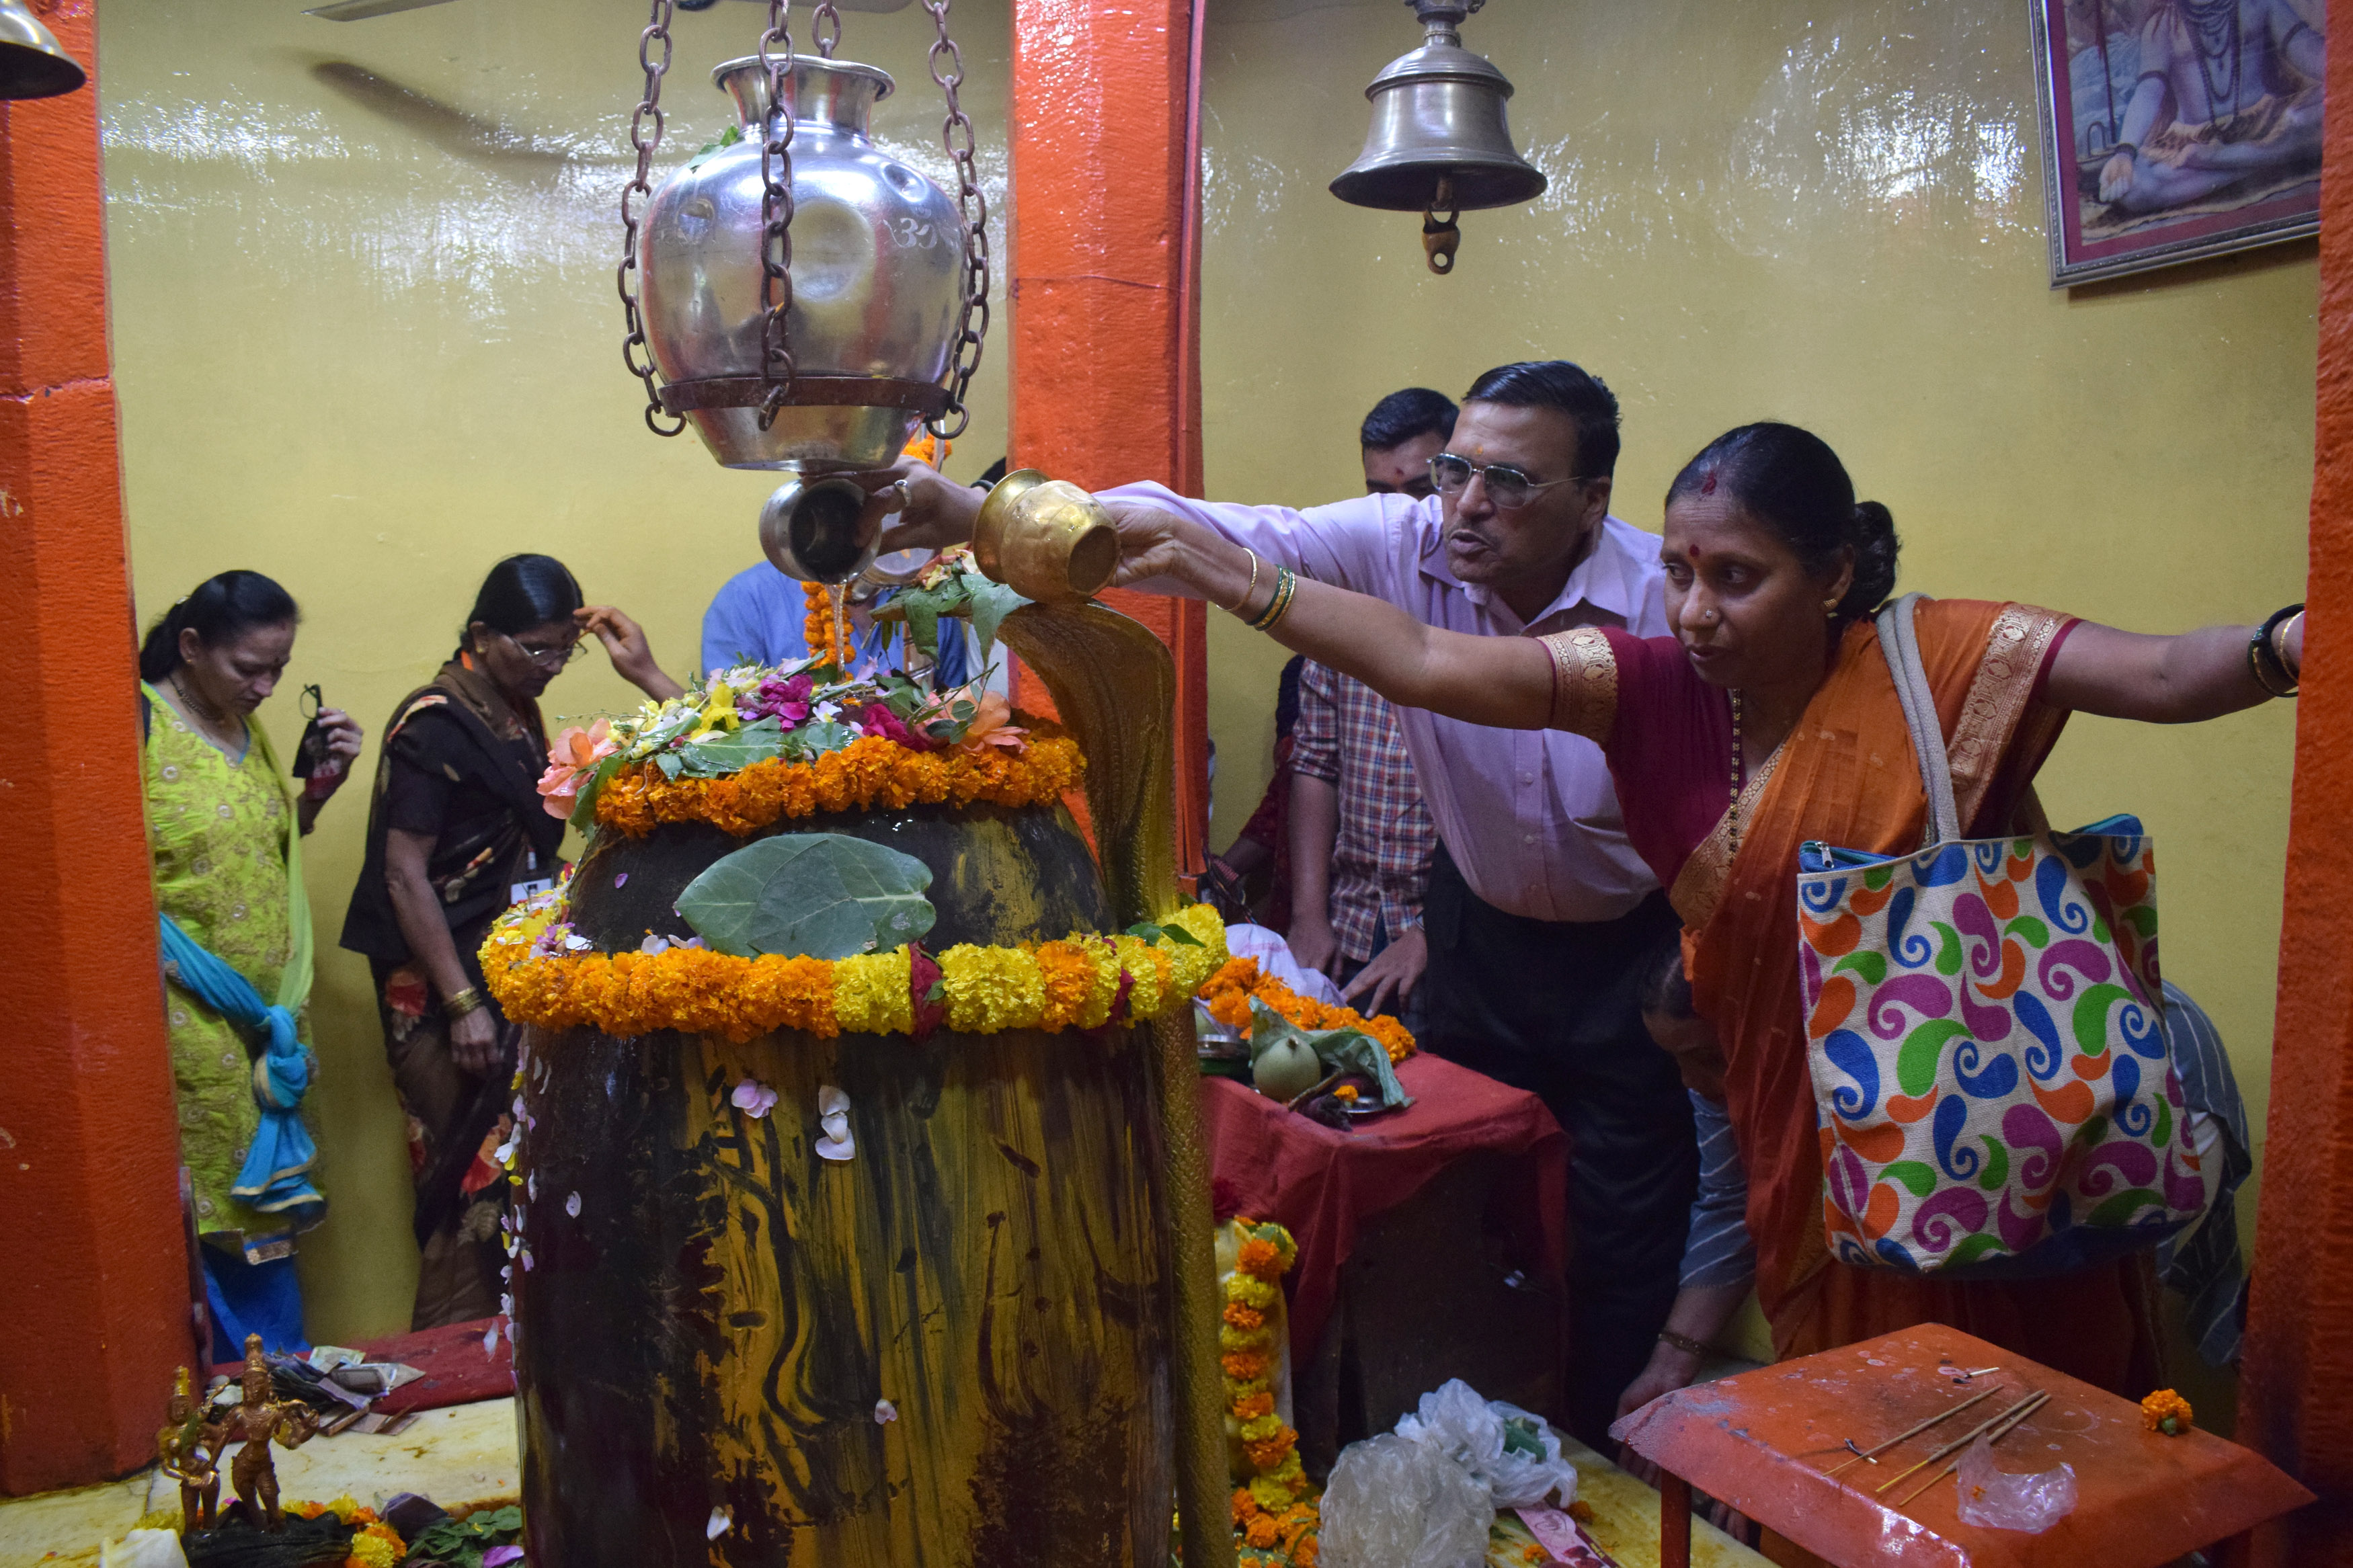 Shankracharya Jayanti was celebrated on 7th May across Srinagar with religious fervour and gaiety